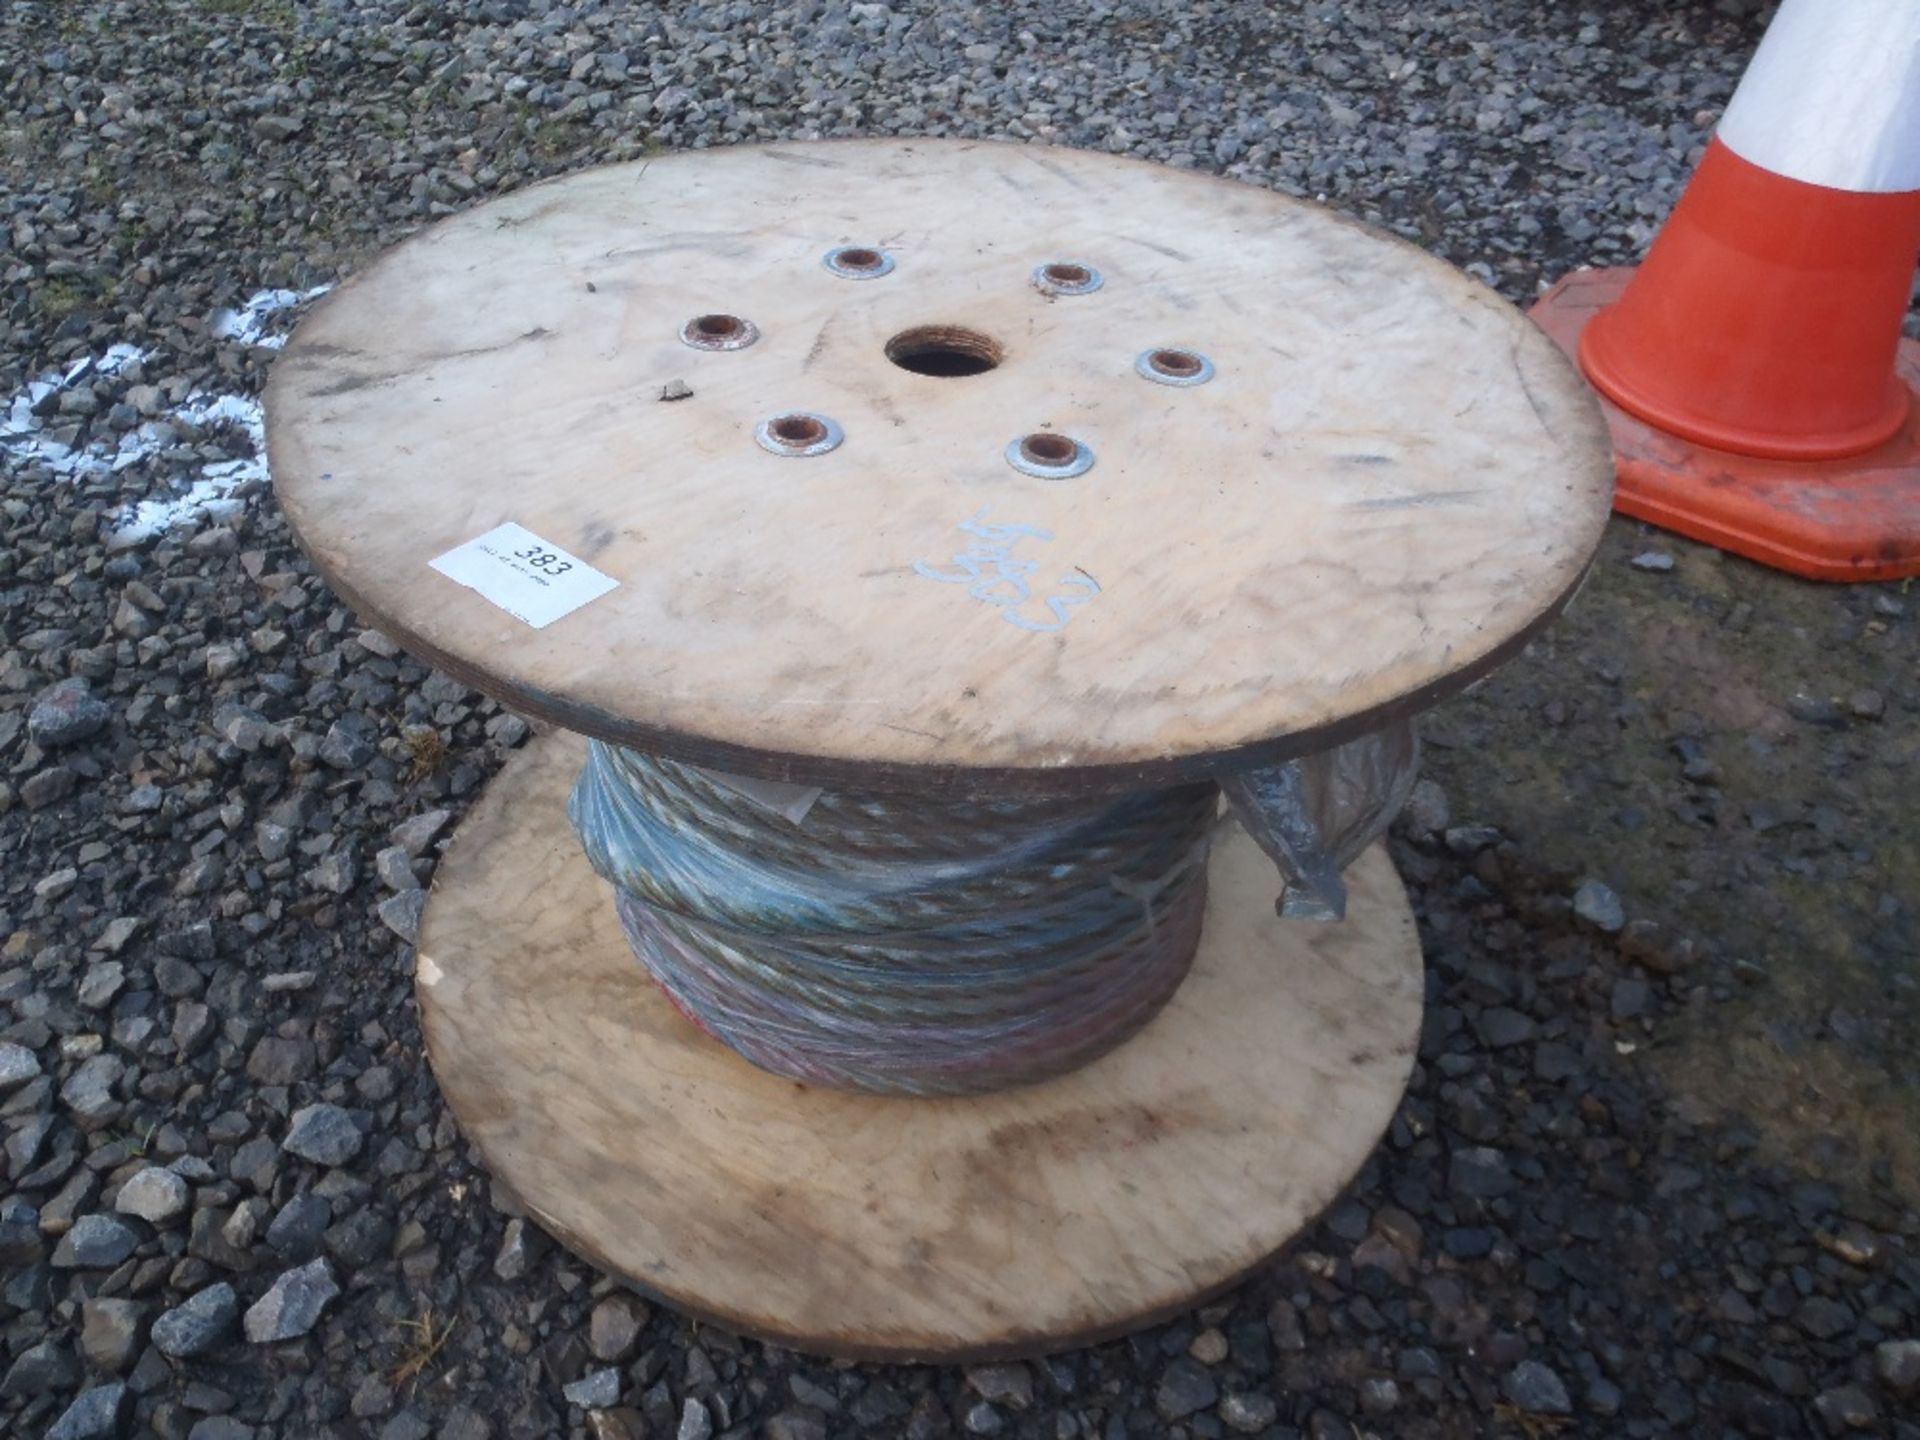 Coil of wire rope